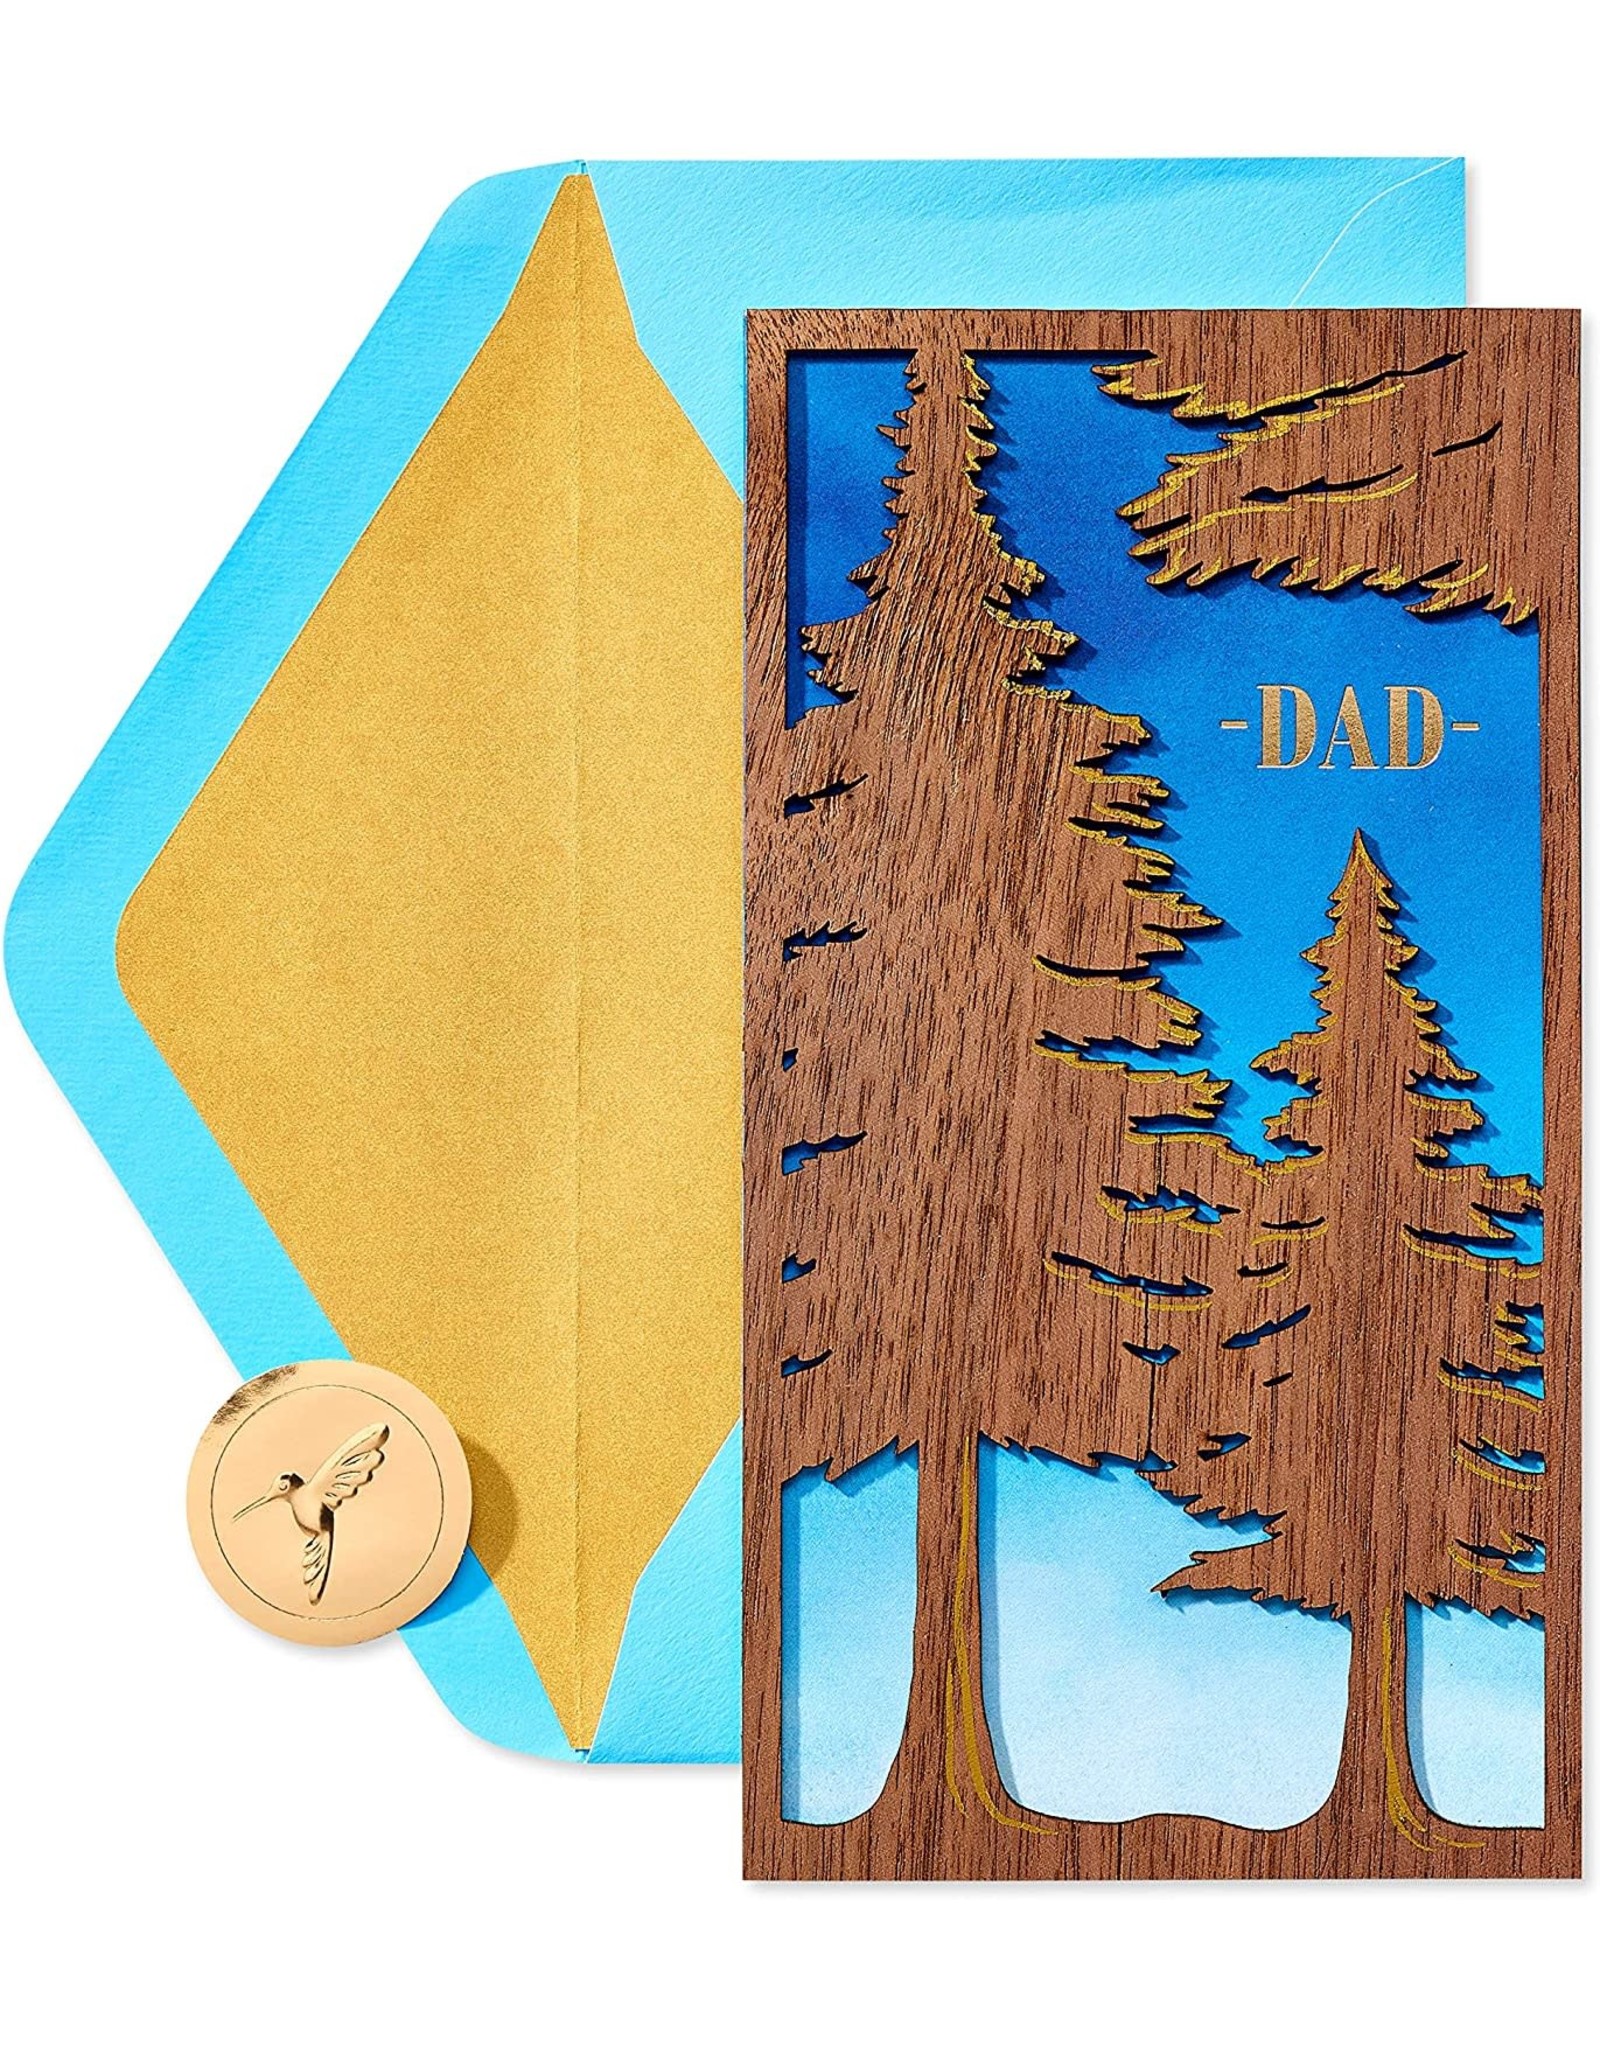 PAPYRUS® Fathers Day Card Laser-cut Wood Trees Love and Guidance